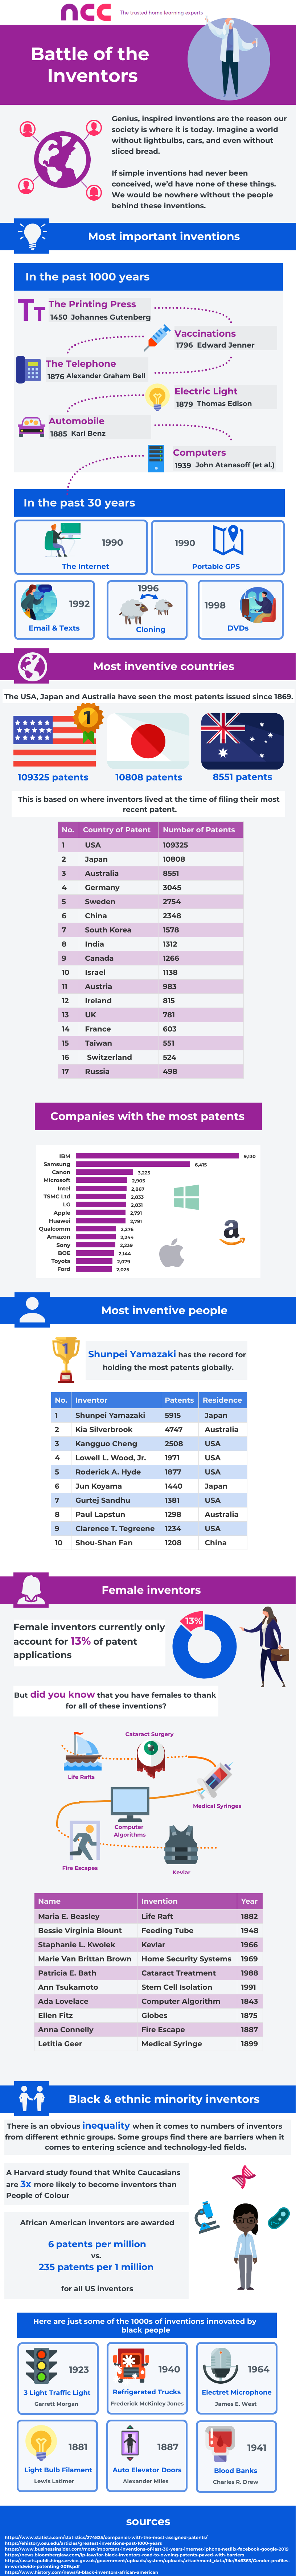 Battle of the inventors infographic